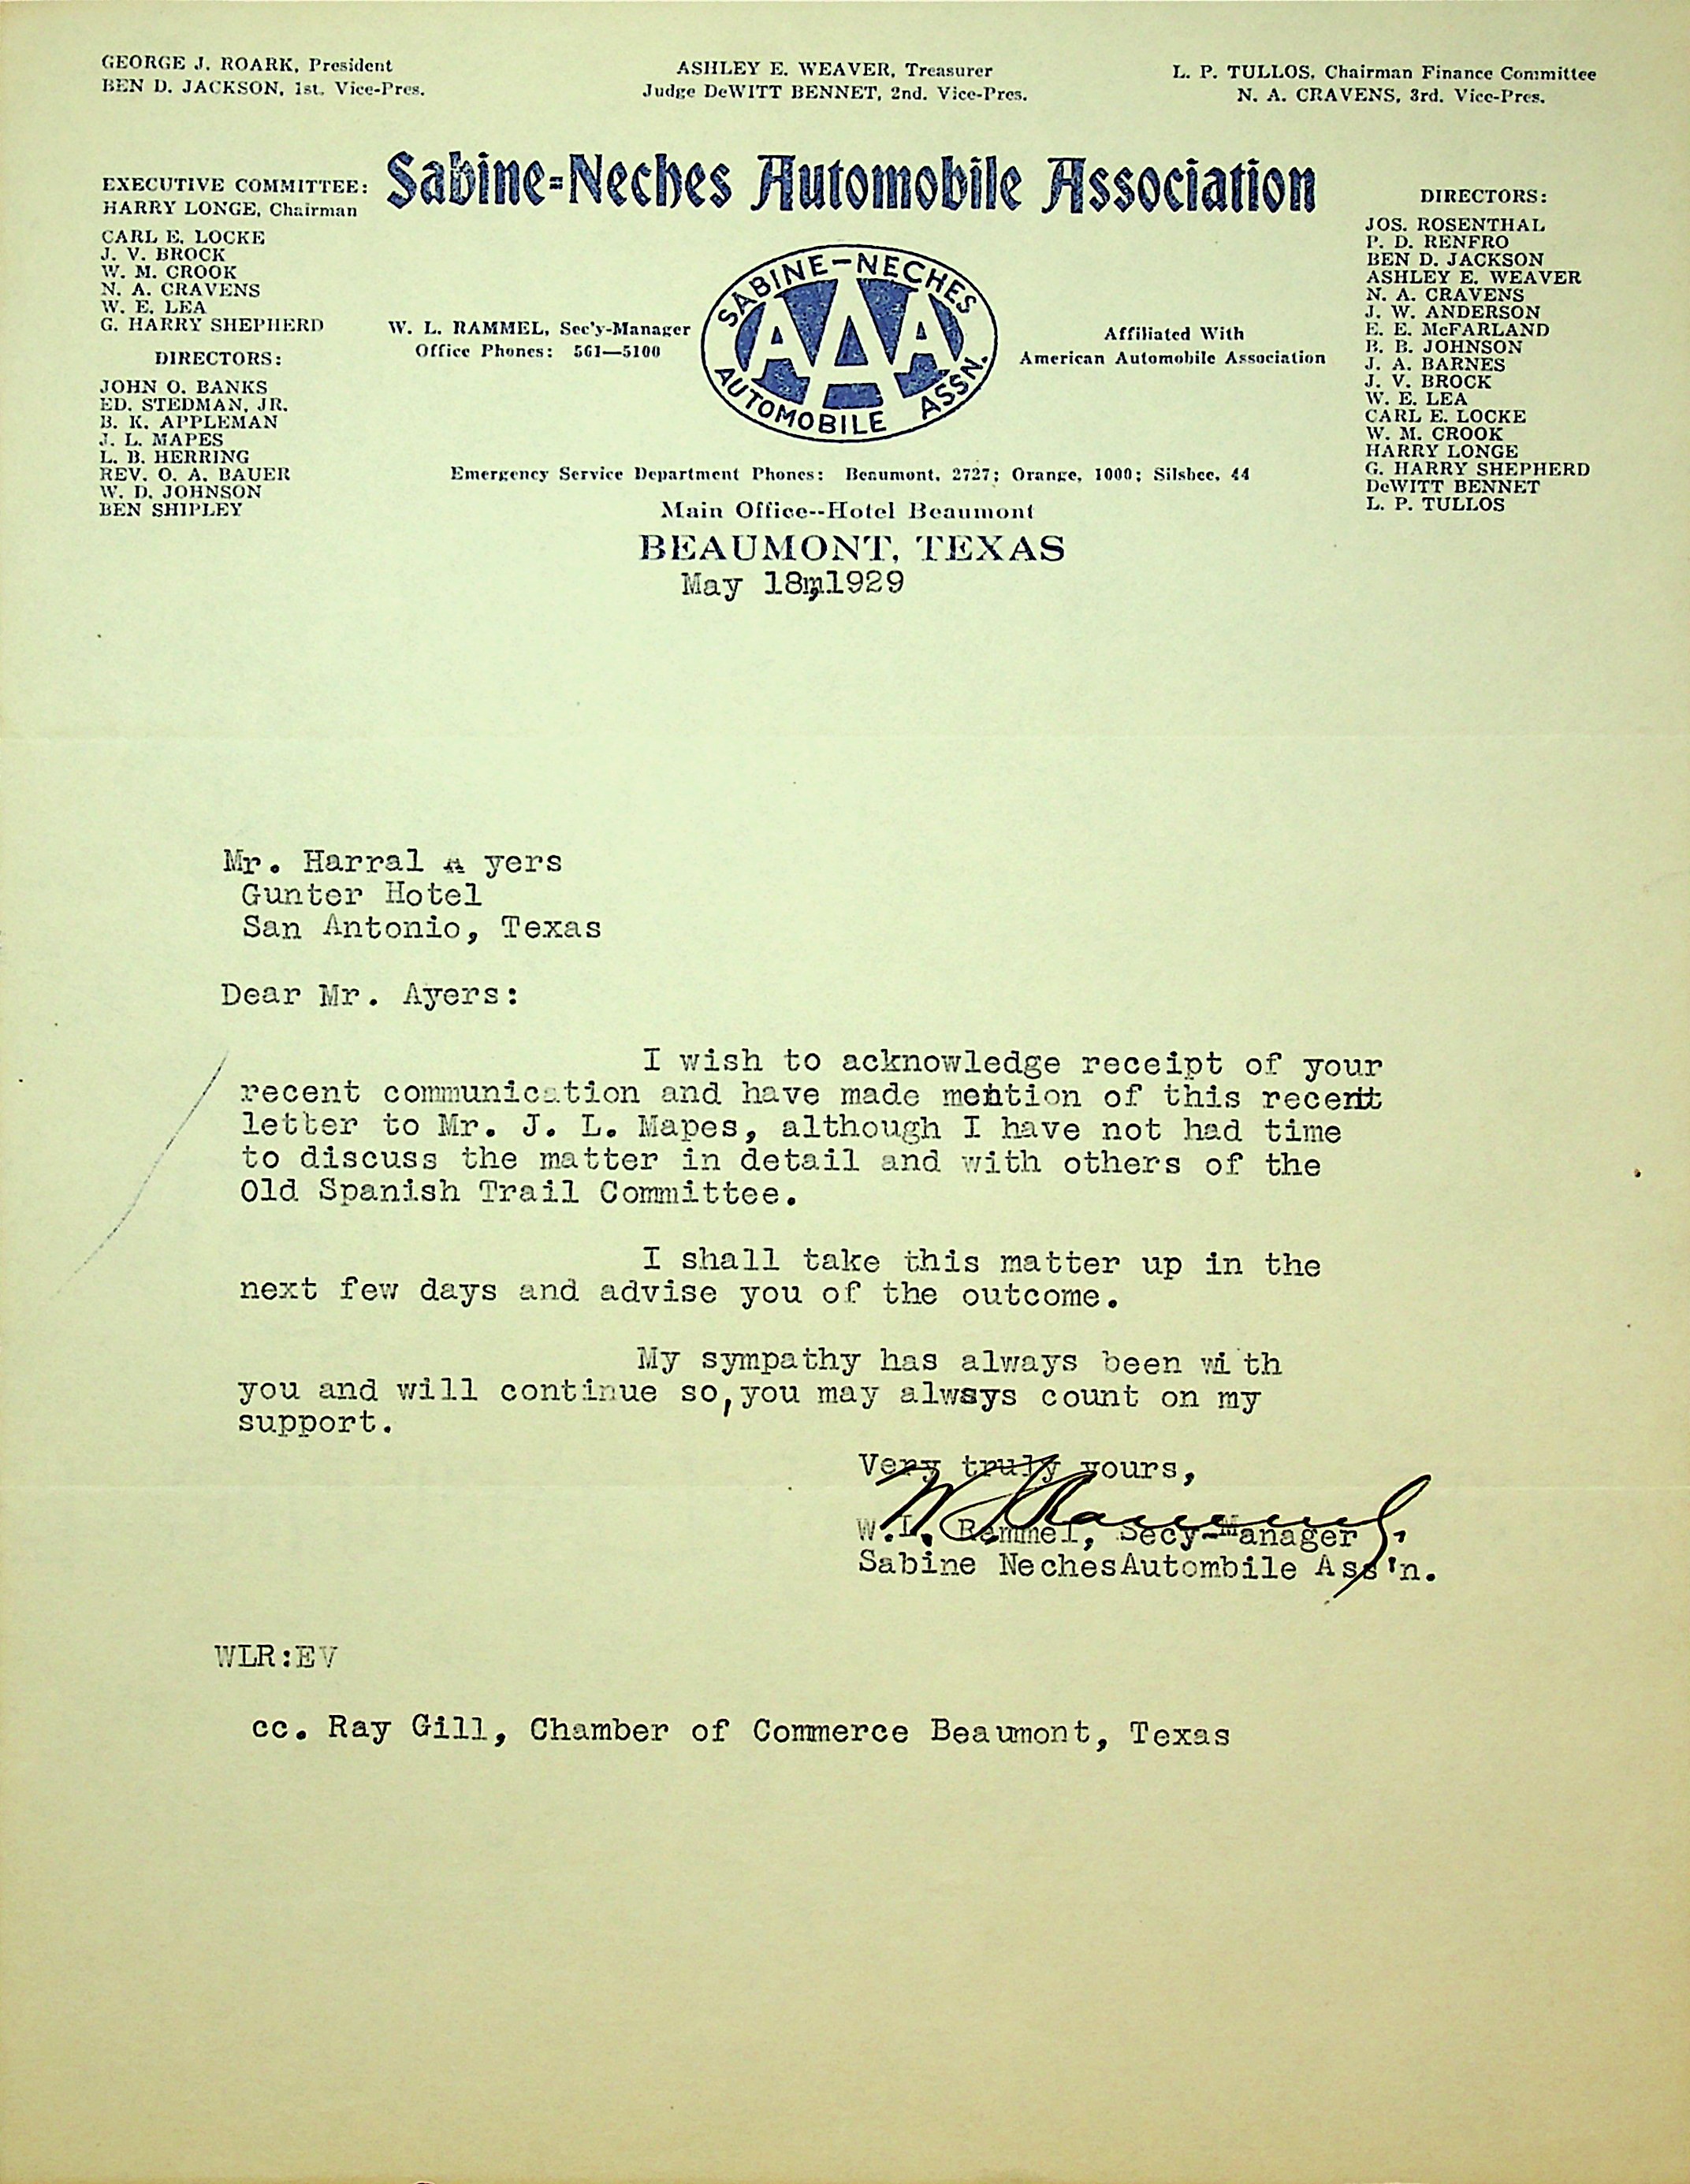 Letter To Mr Harral Ayres Gunter Hotel San Antonio Tex From W L Rammel Secretary Manager Sabine Neches Automobile Association Beaumont Texas May 18 1929 Cc Ray Gill Chamber Of Commerce Beaumont Tex